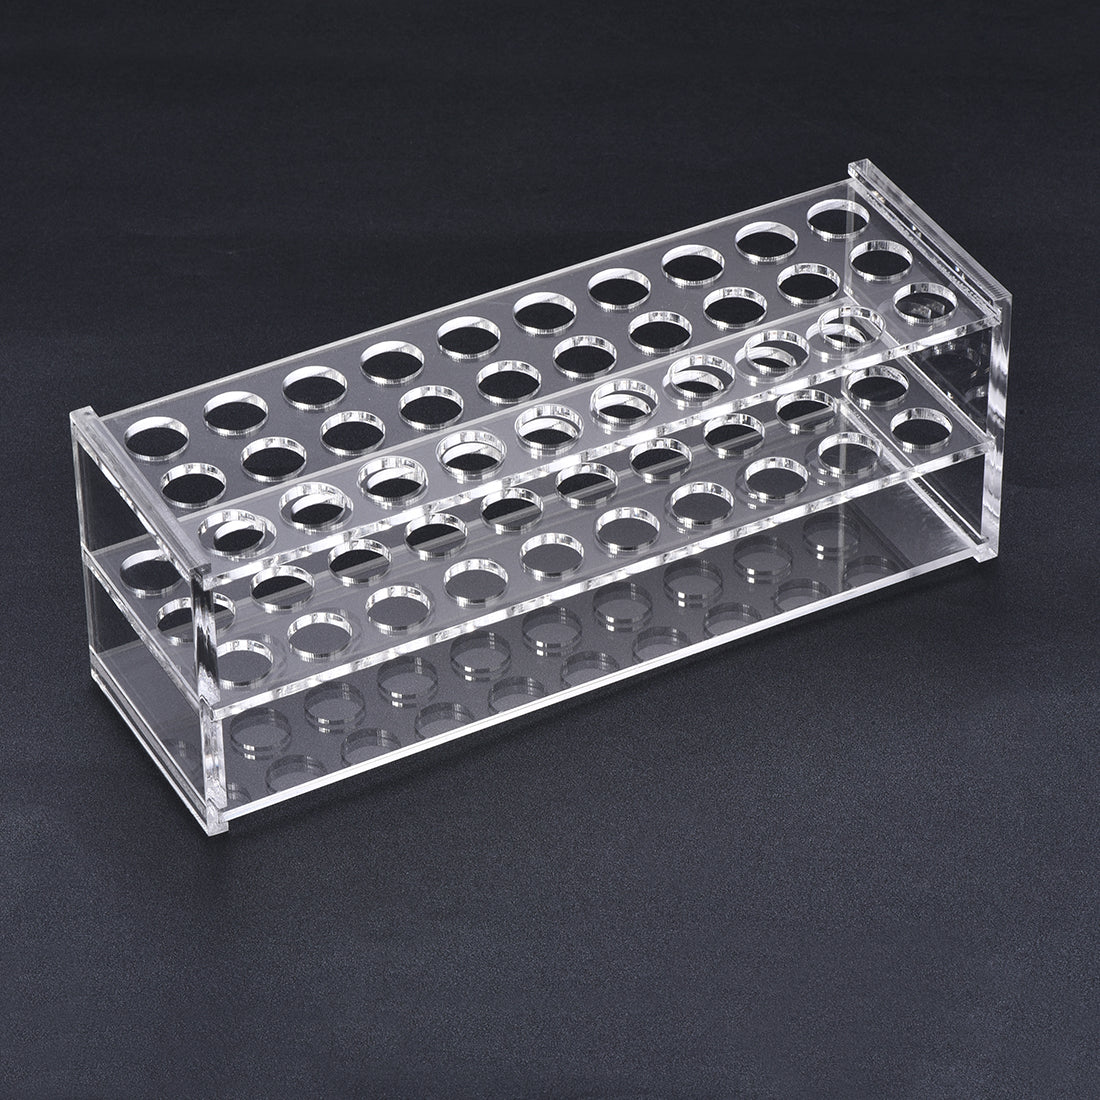 uxcell Uxcell Acrylic Test Tube Holder Rack 3x10 Wells for 11-13mm Centrifuge Tubes Clear